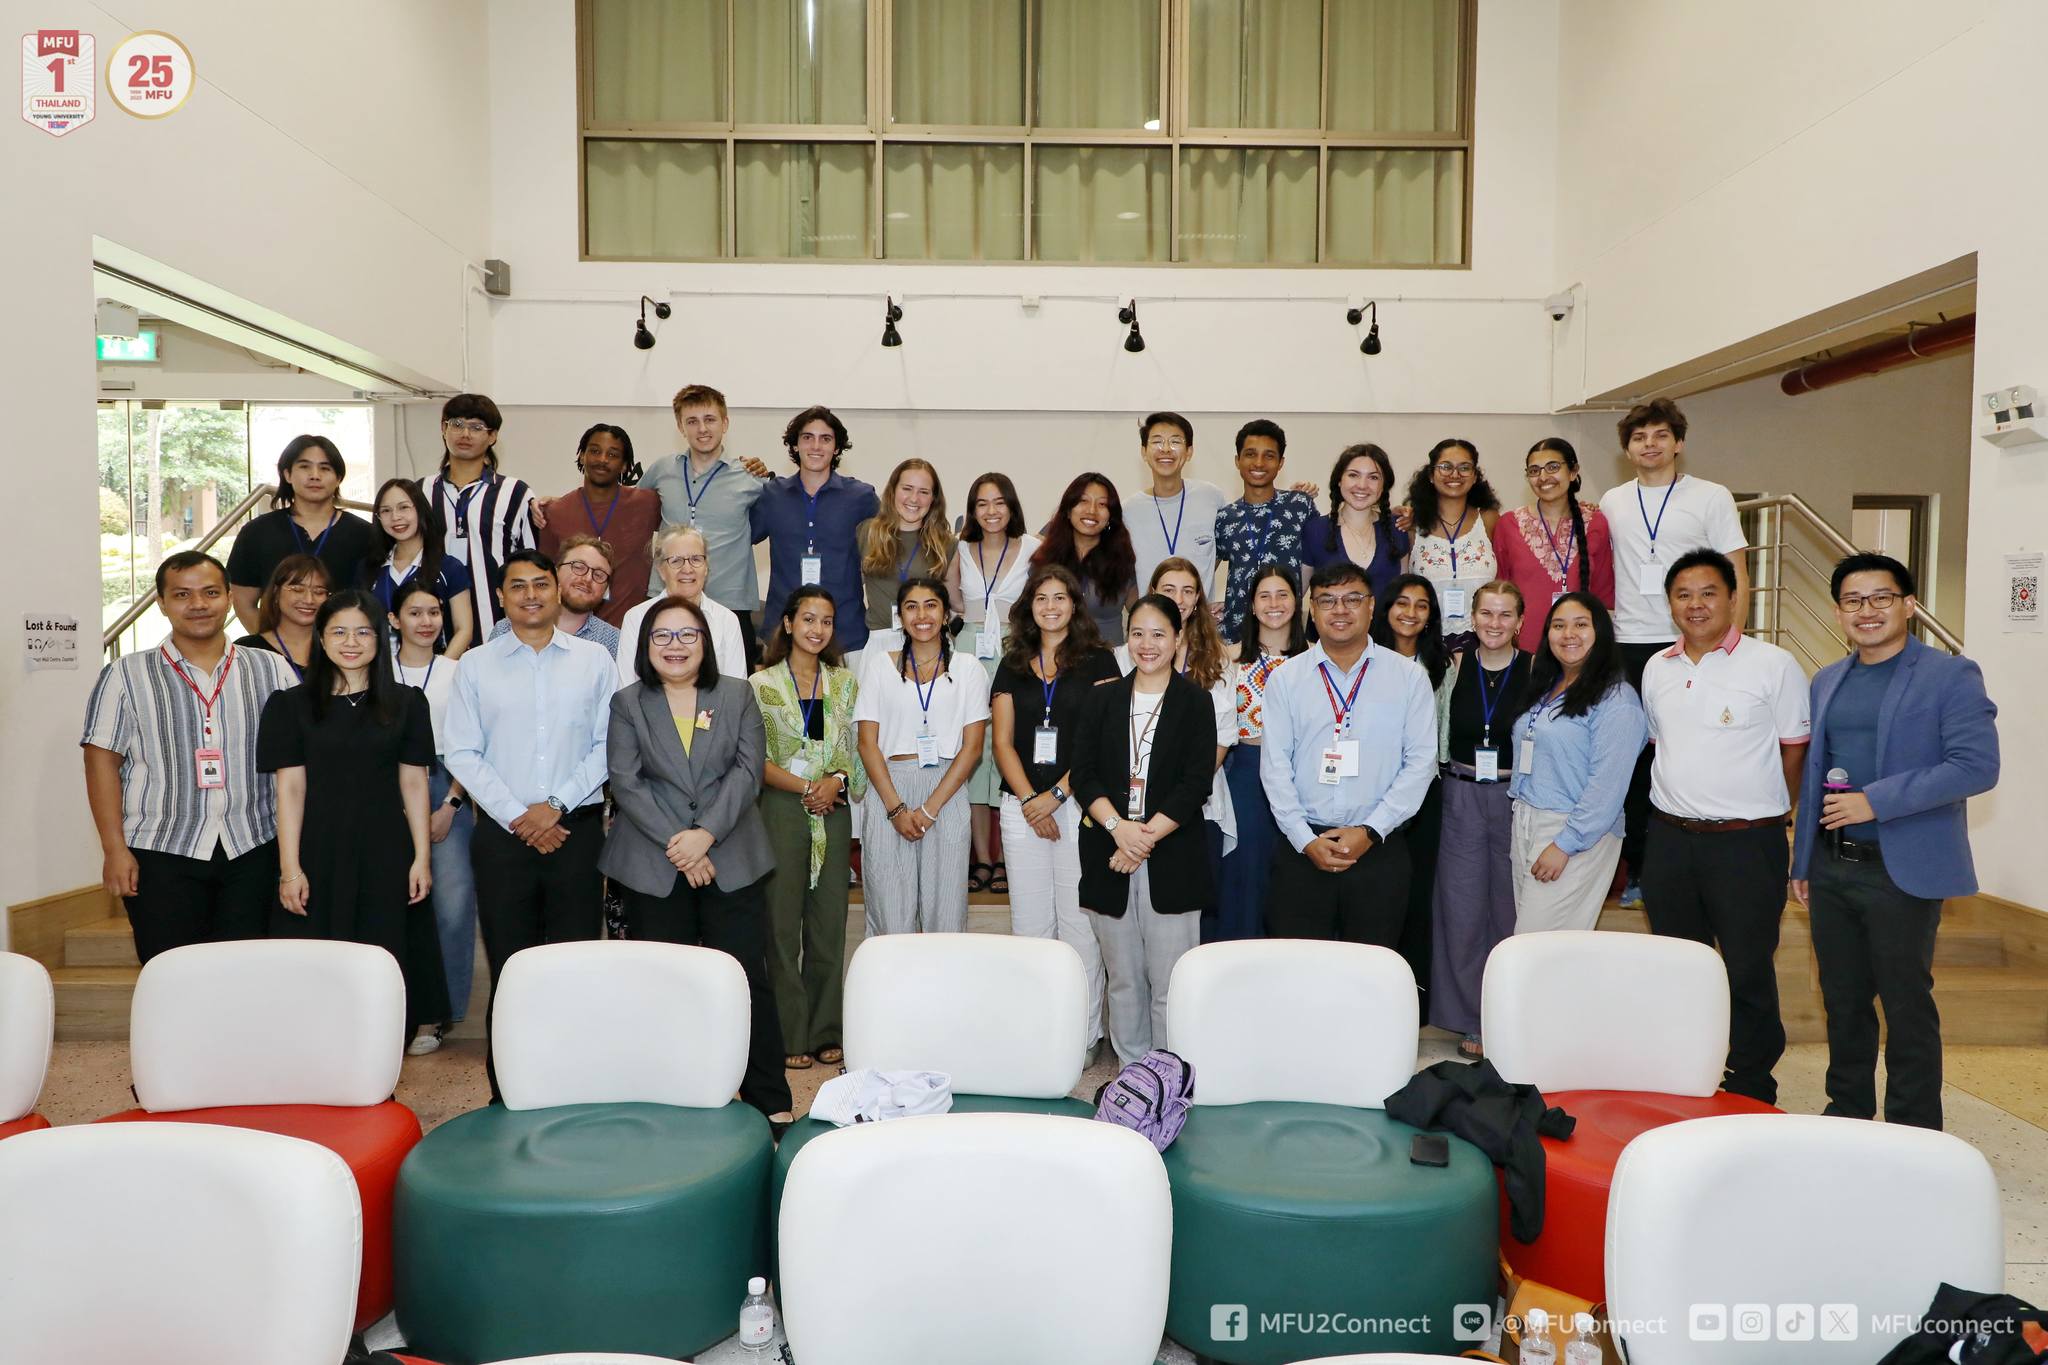 Emphasizing Sustainability: UNC and MFU Team Up for Public Health, Entrepreneurship, and Food Systems Research in Thailand